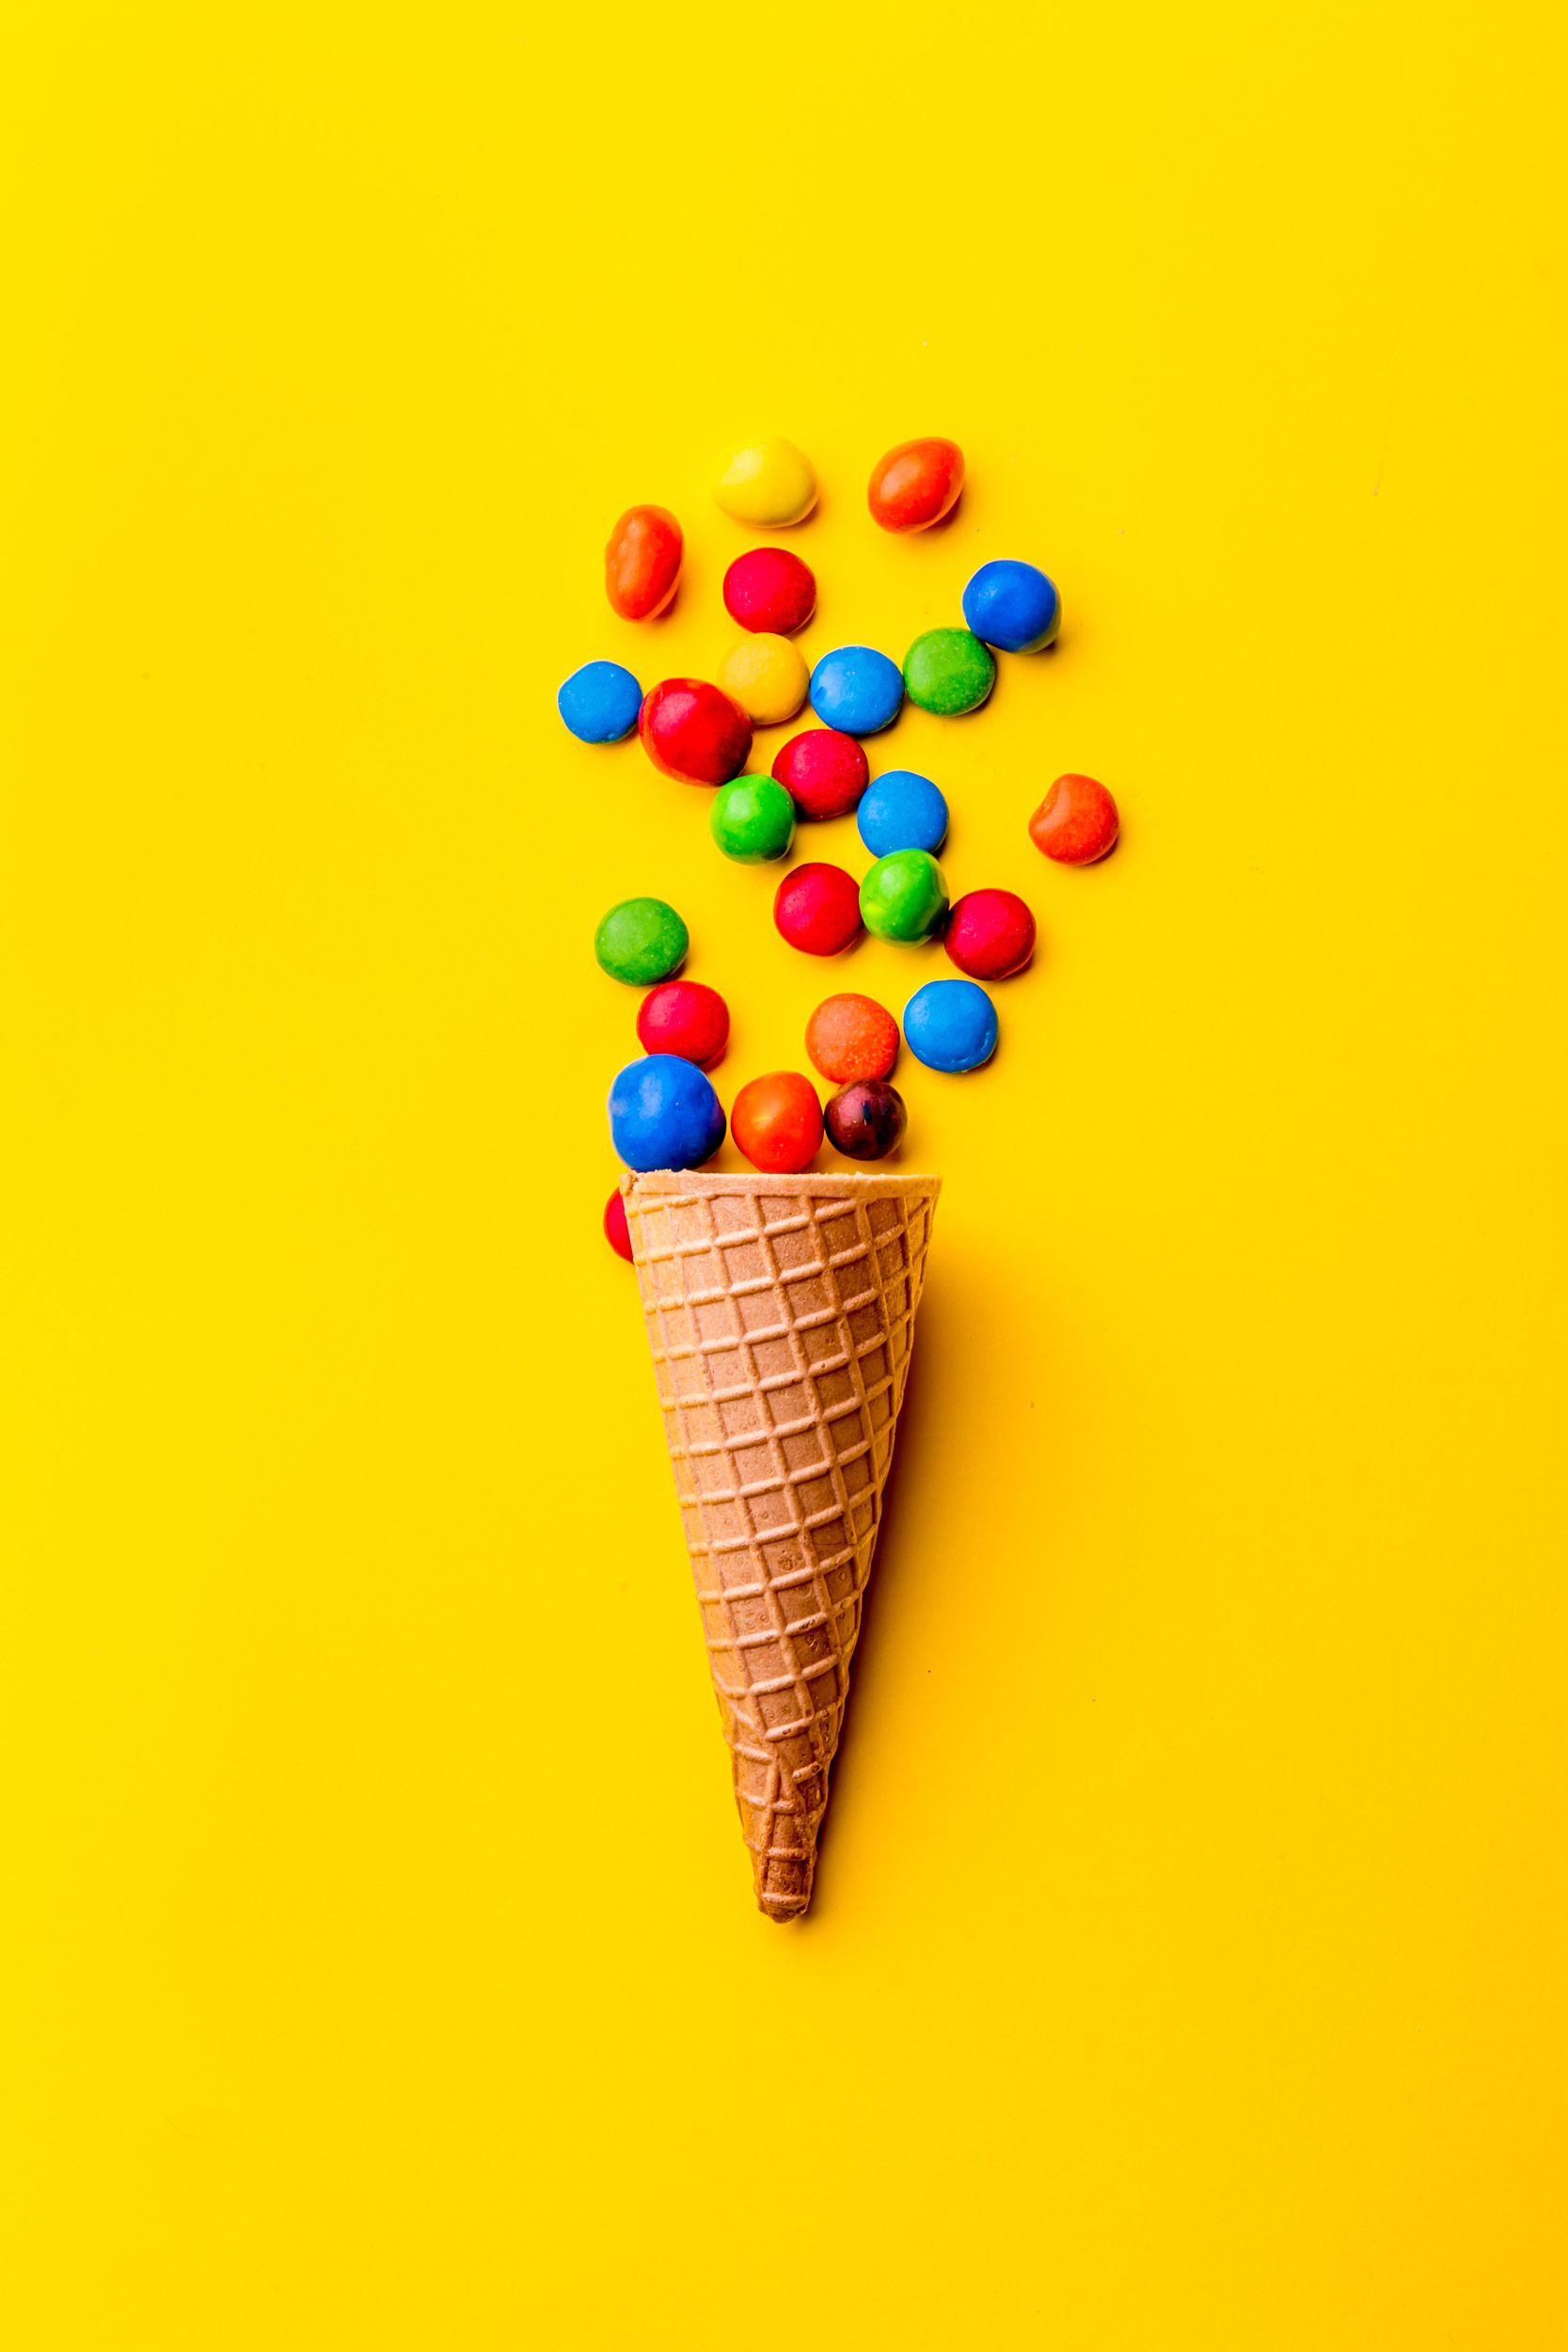 ice-creame-cone-with-candy-on-yellow-background-m-2021-08-28-14-46-31-utc